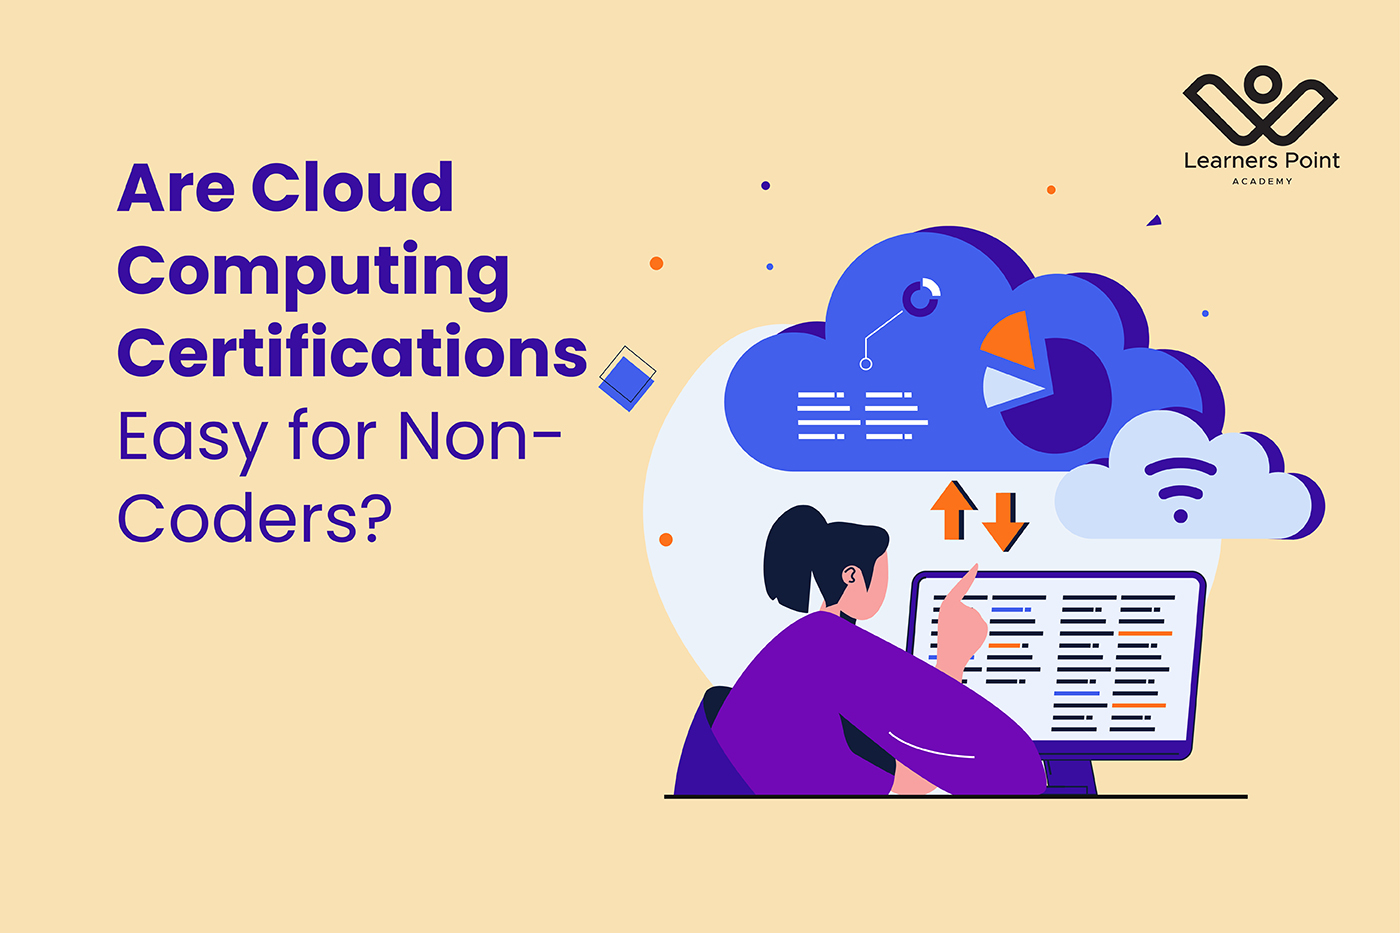 Are Cloud Computing Certifications Easy for Non-Coders?